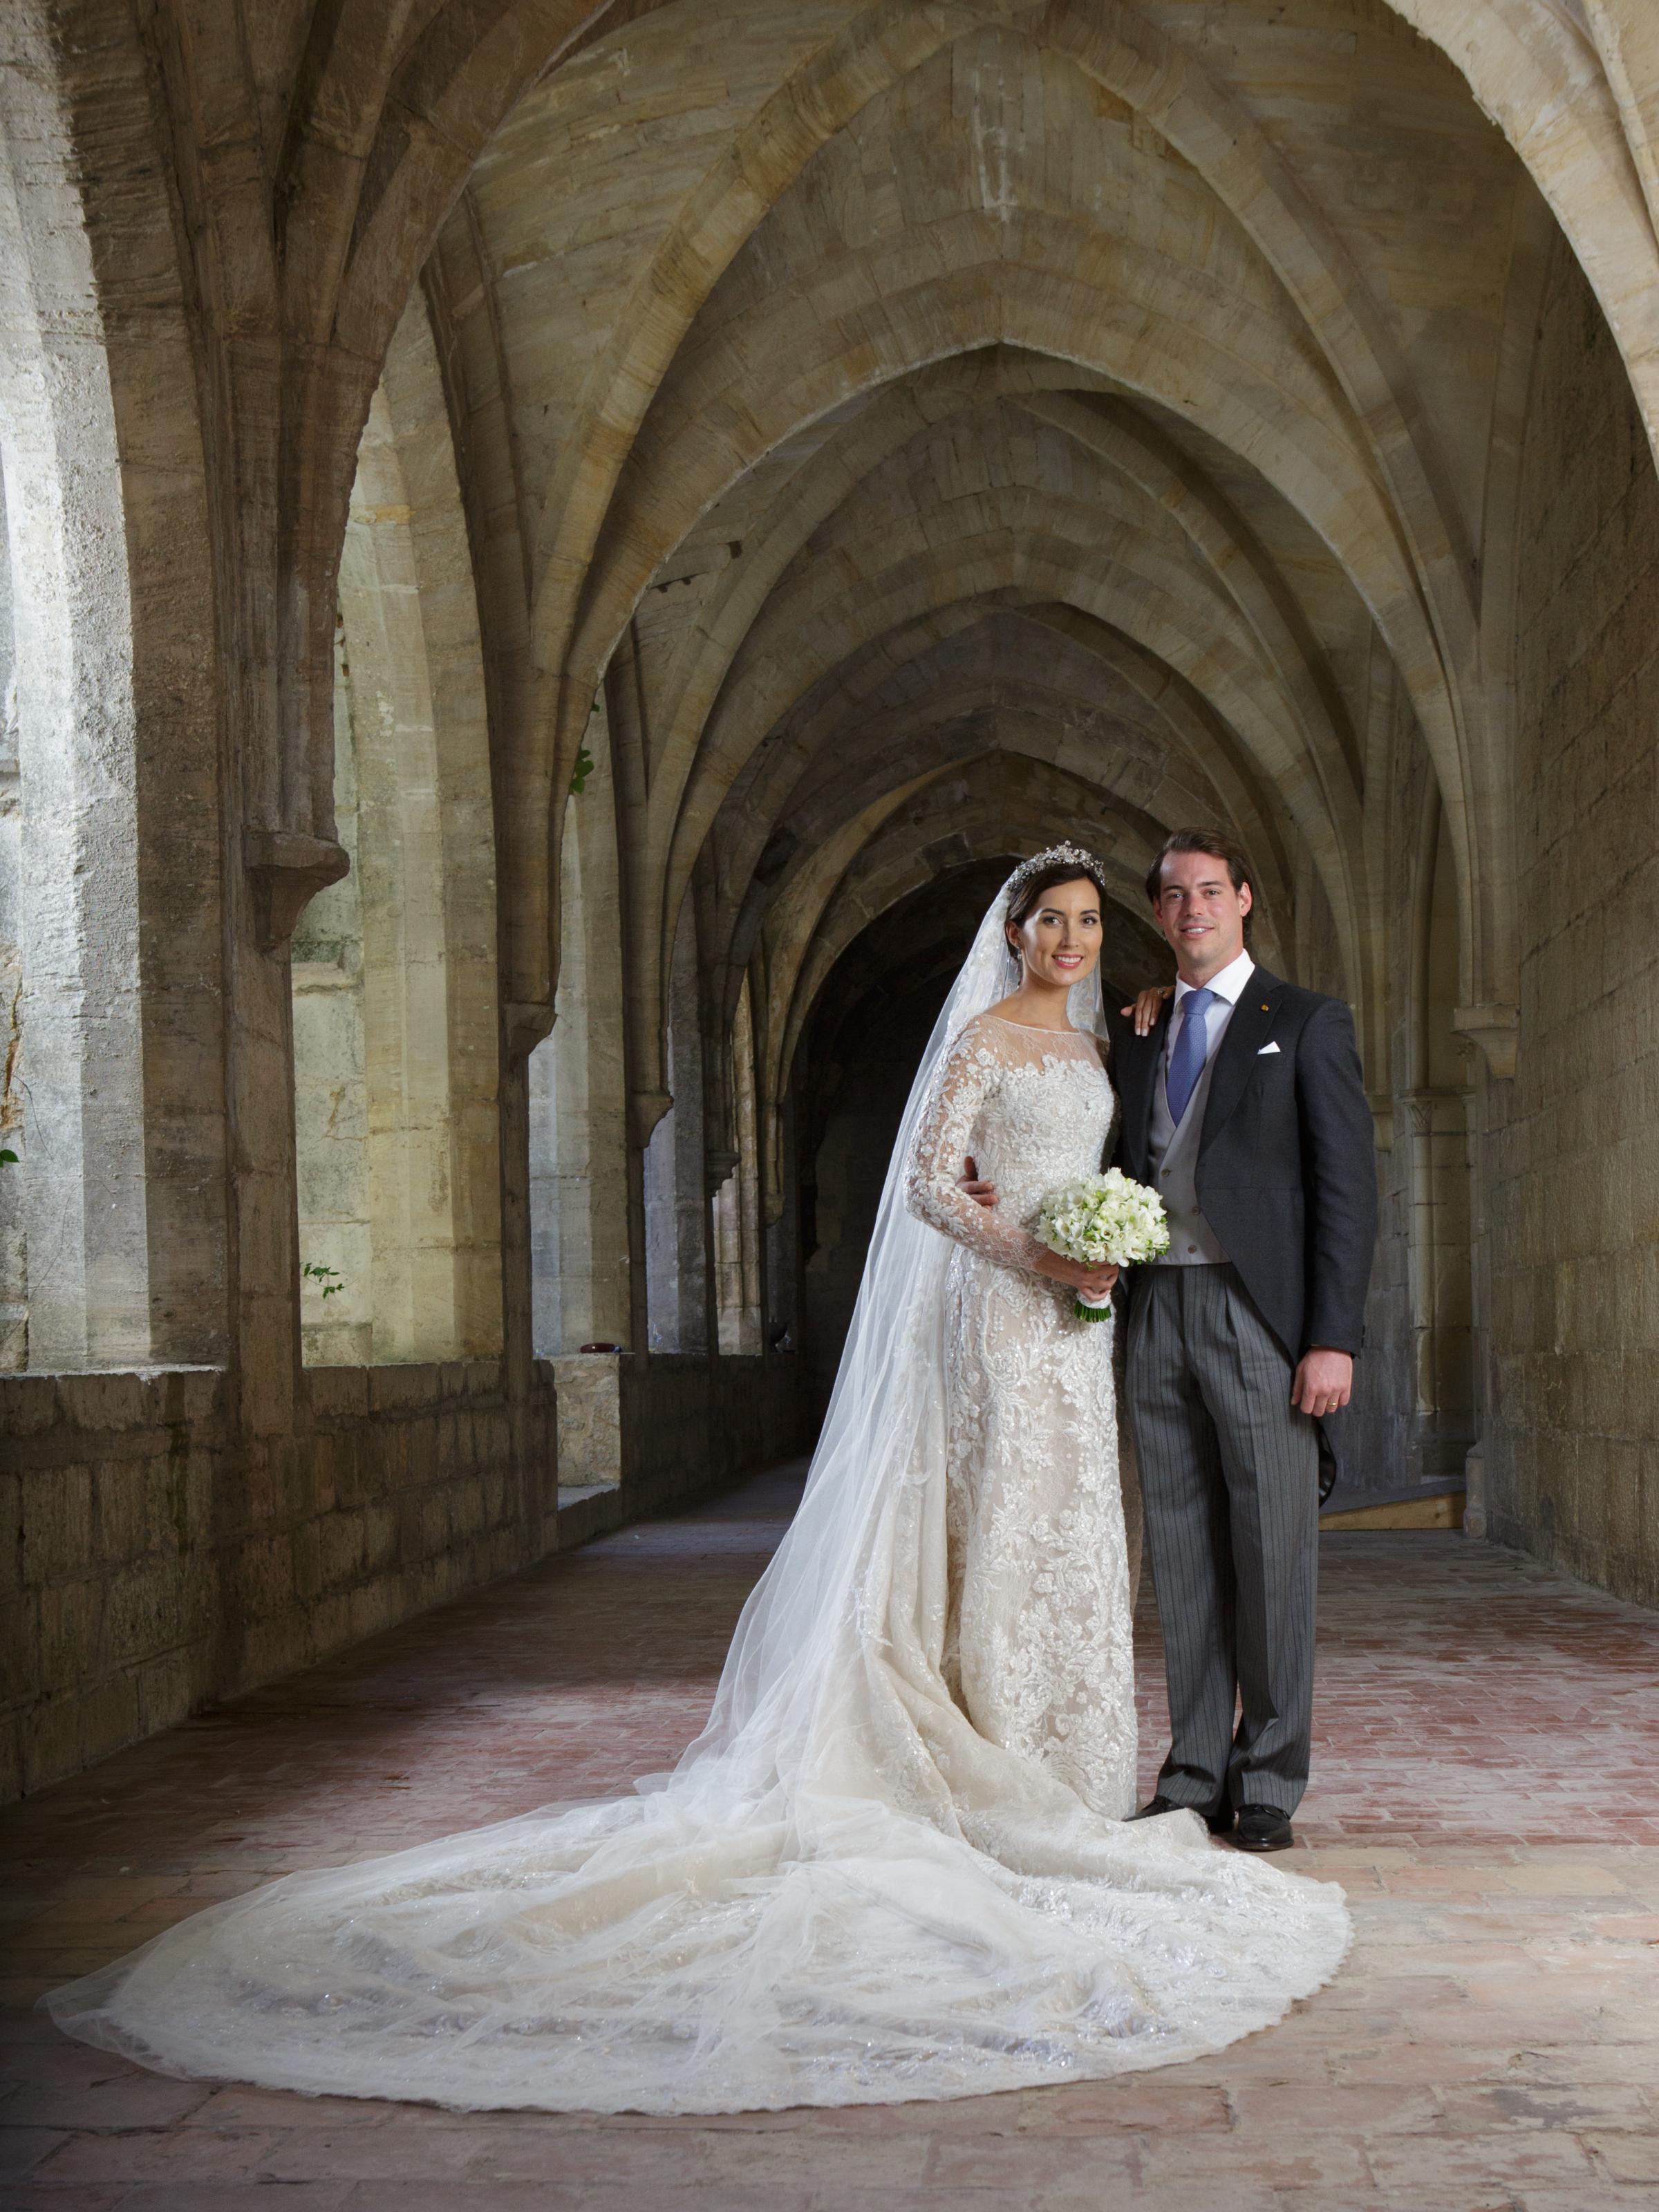 Wedding Of Prince Felix Of Luxembourg &amp; Claire Lademacher : Reception At 'Couvent Royal'